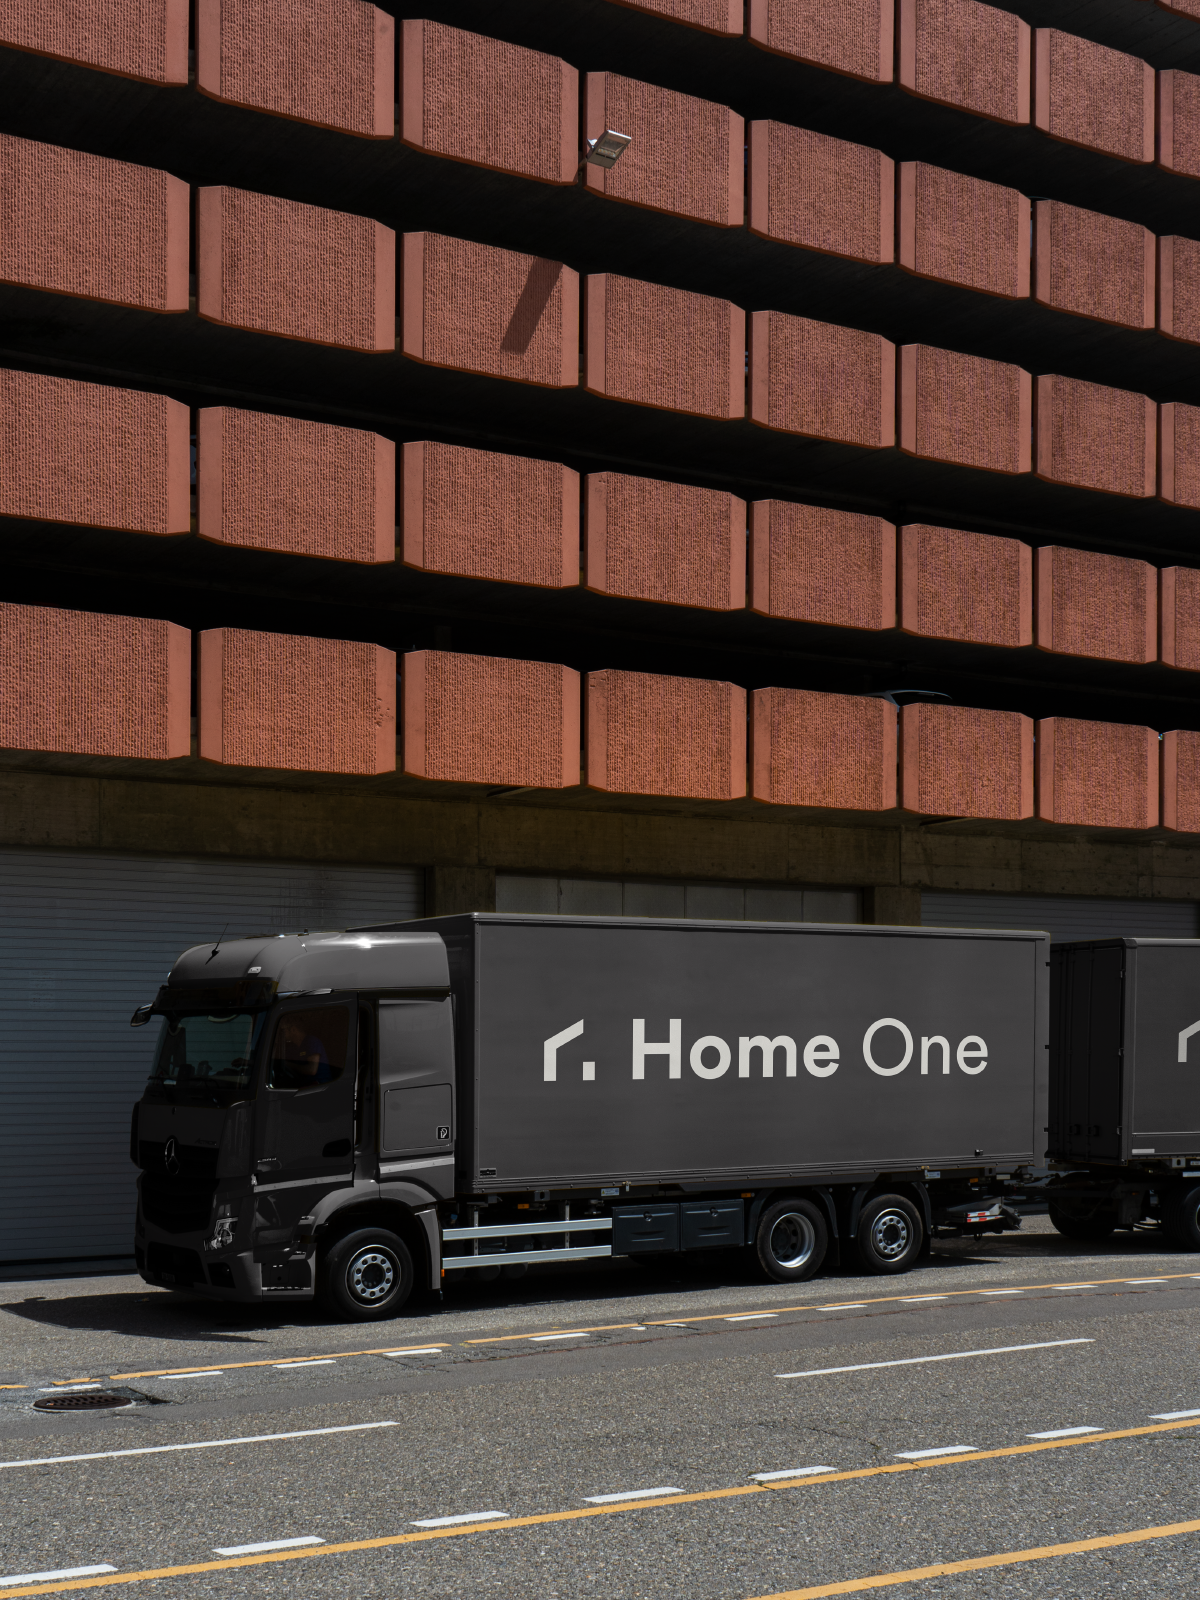 640527e7c56a045d2435ca3a_Home-One_Project_Body-Image-Delivery-Truck.png